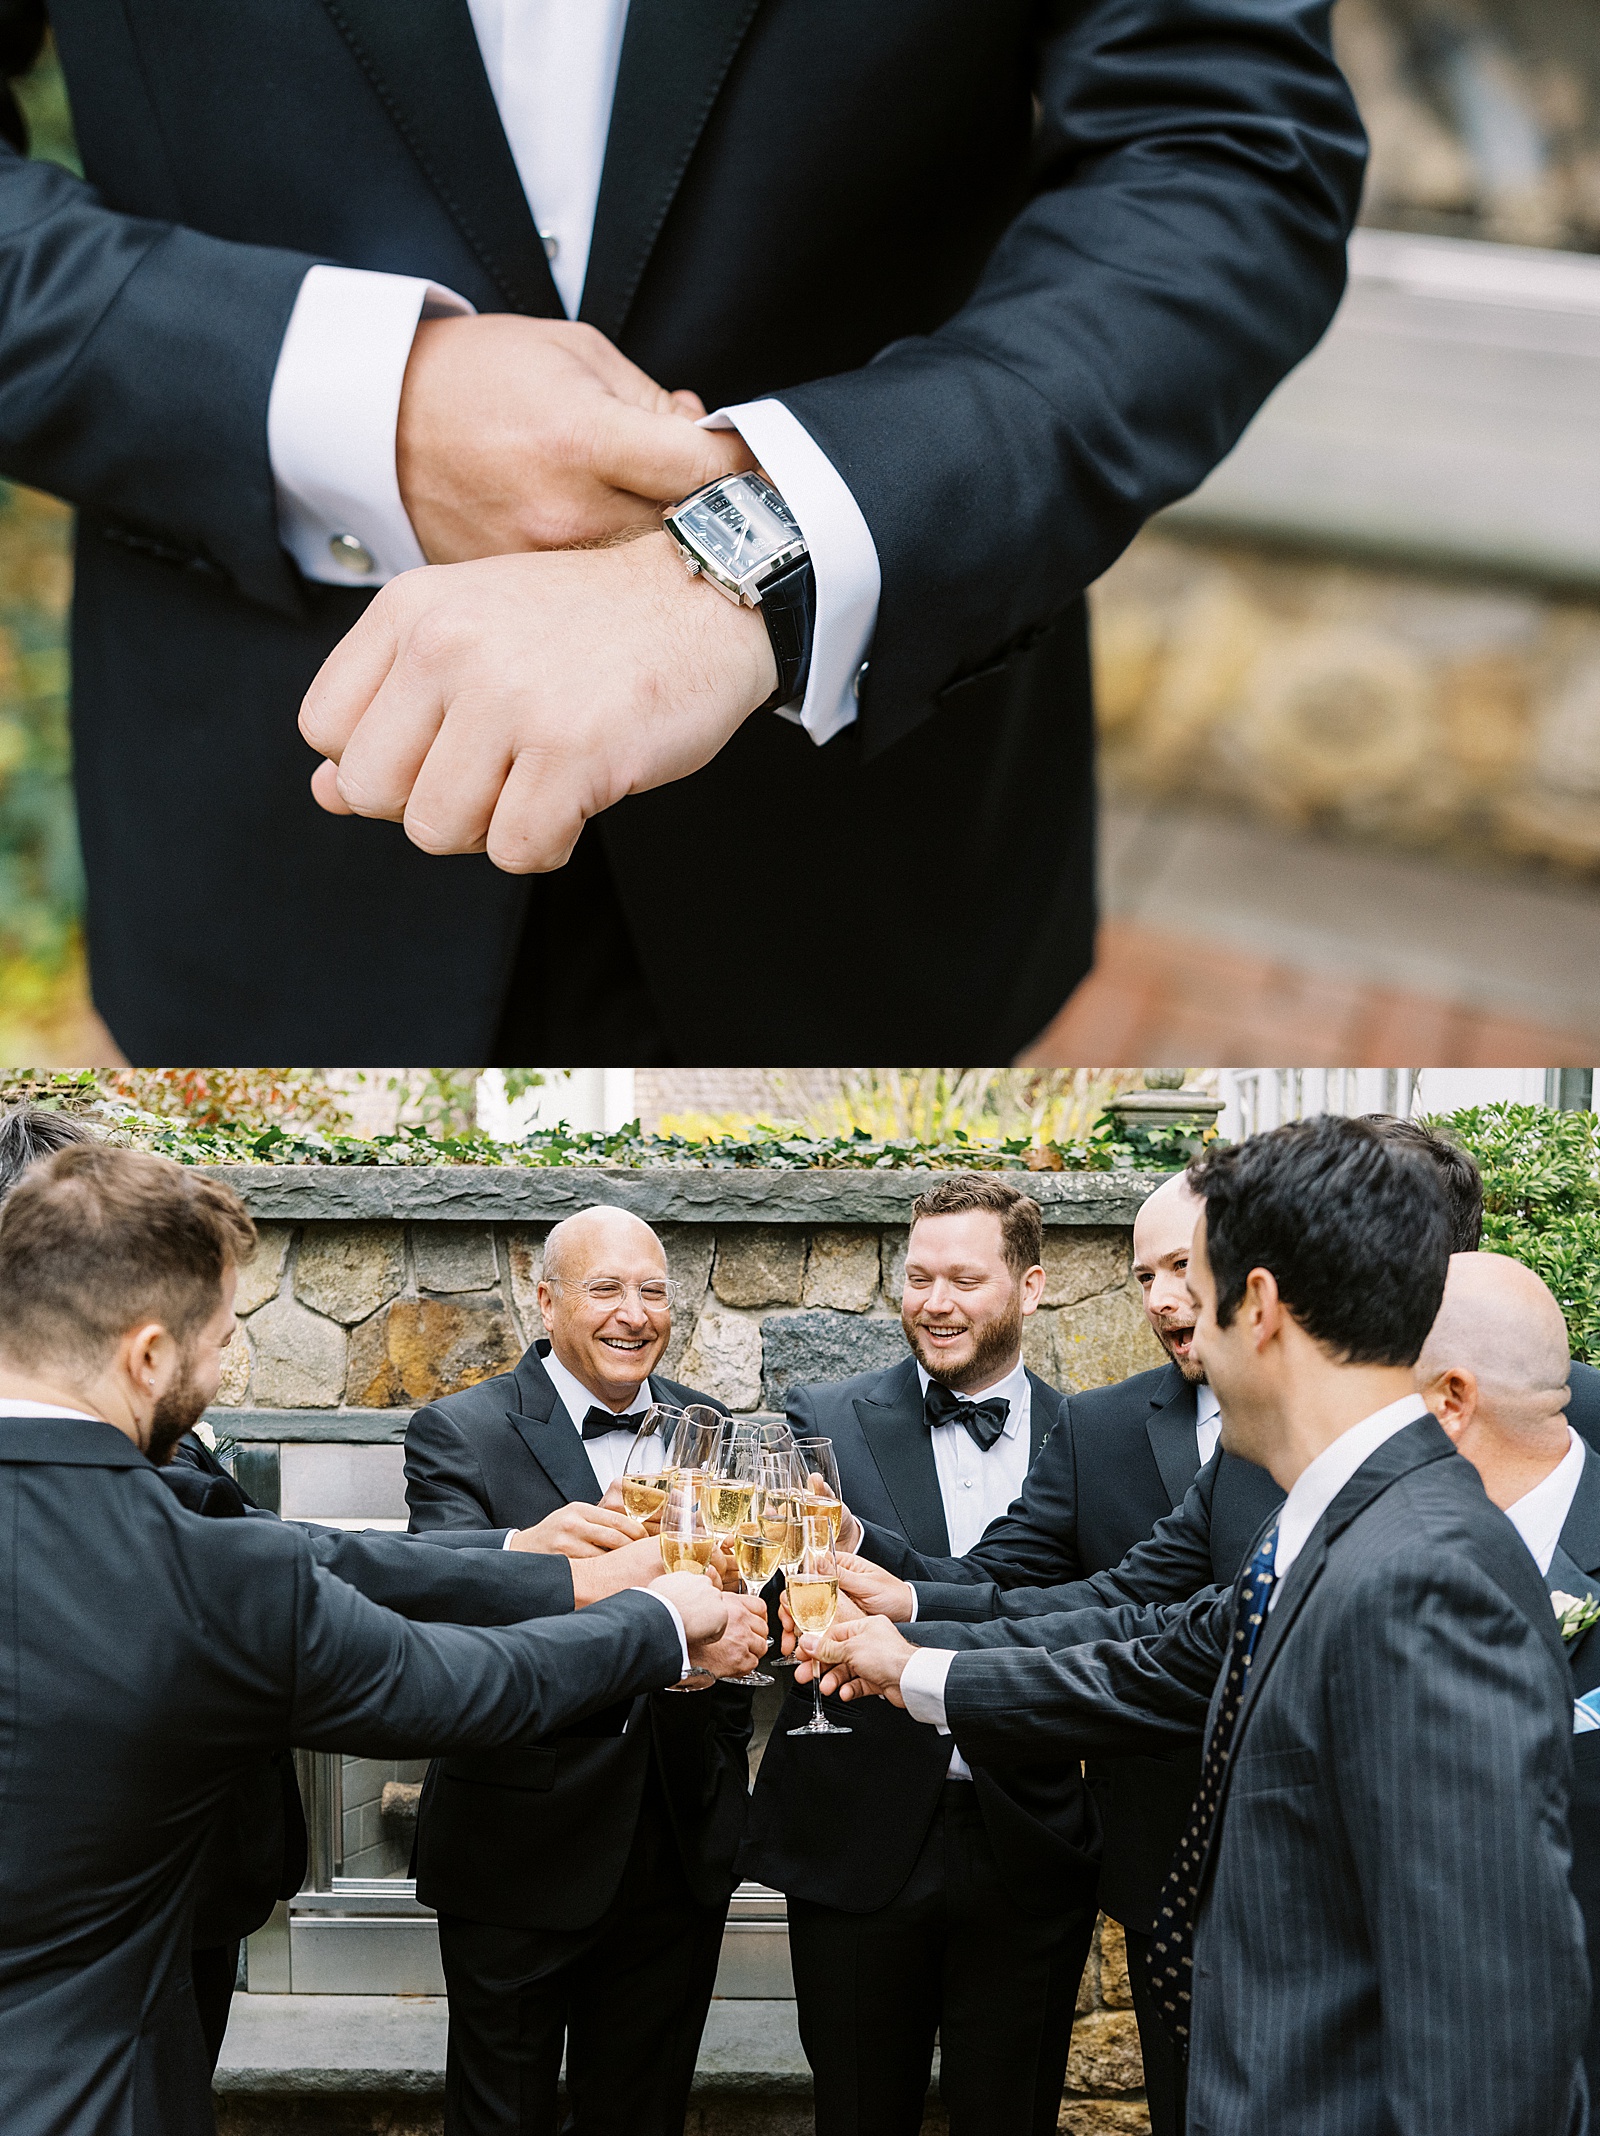 Groomsmen and groom toasting on a patio in Cape Cod